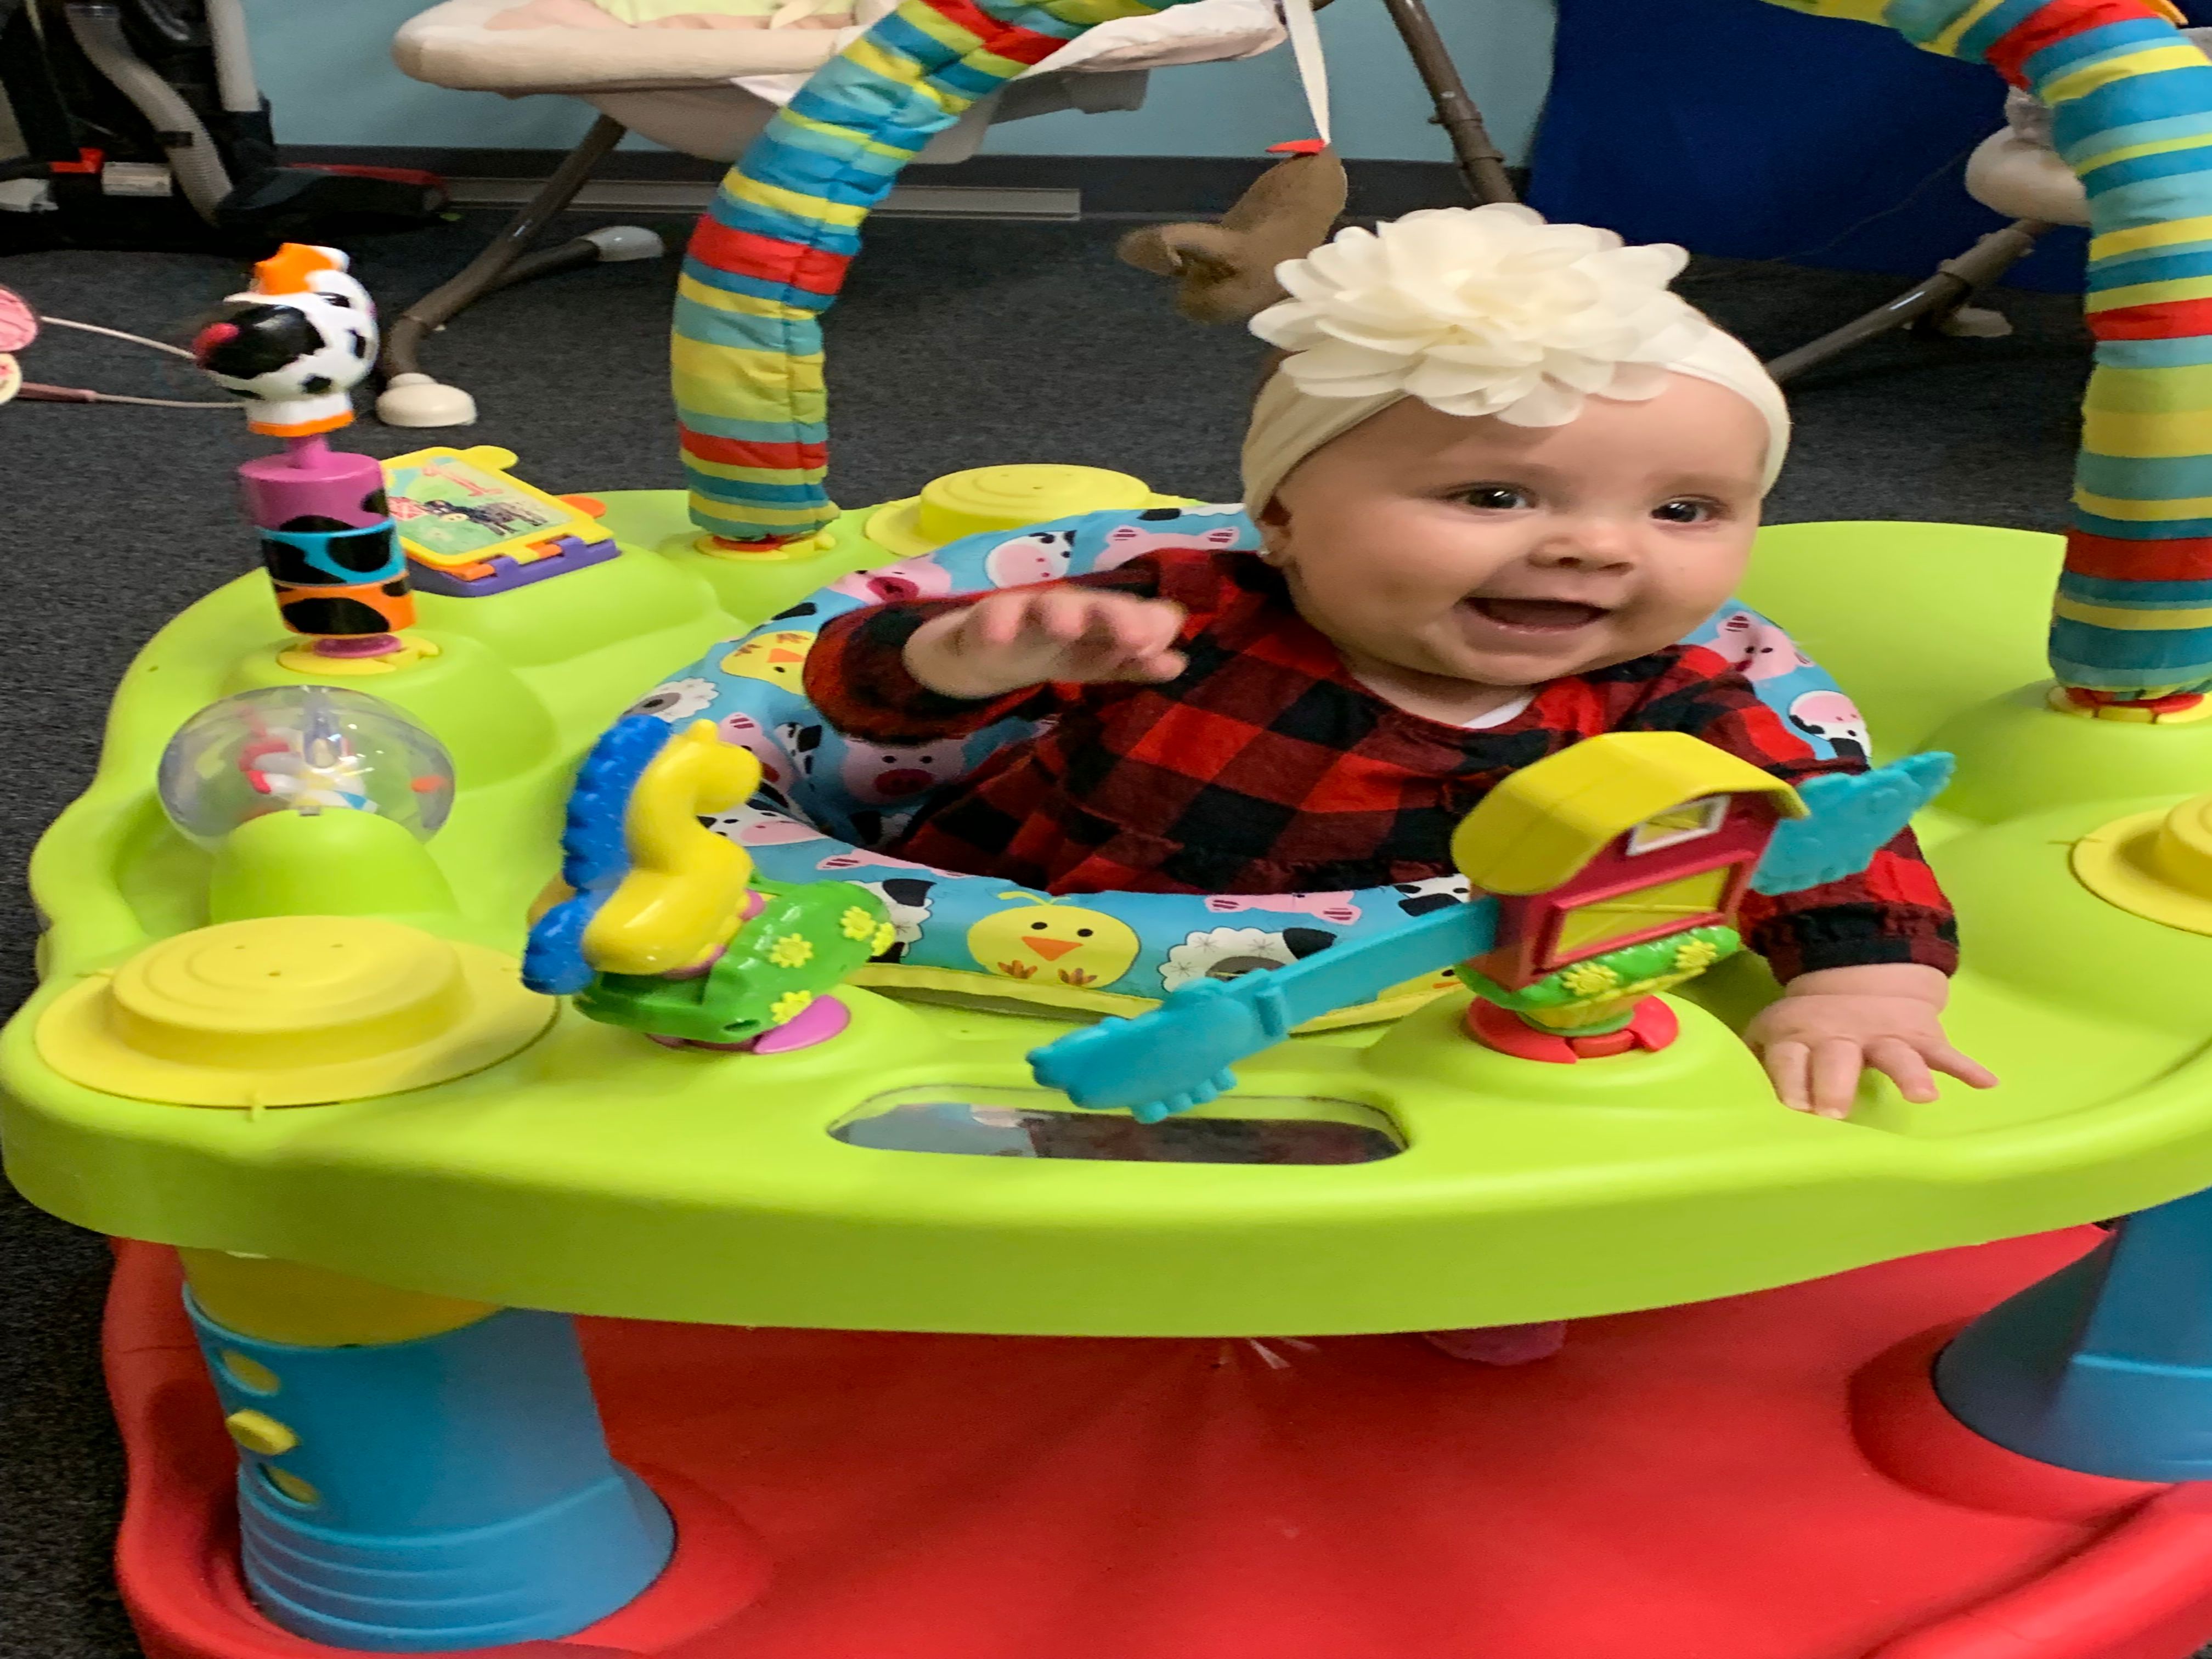 Toddler Care in Cheyenne, Wyoming